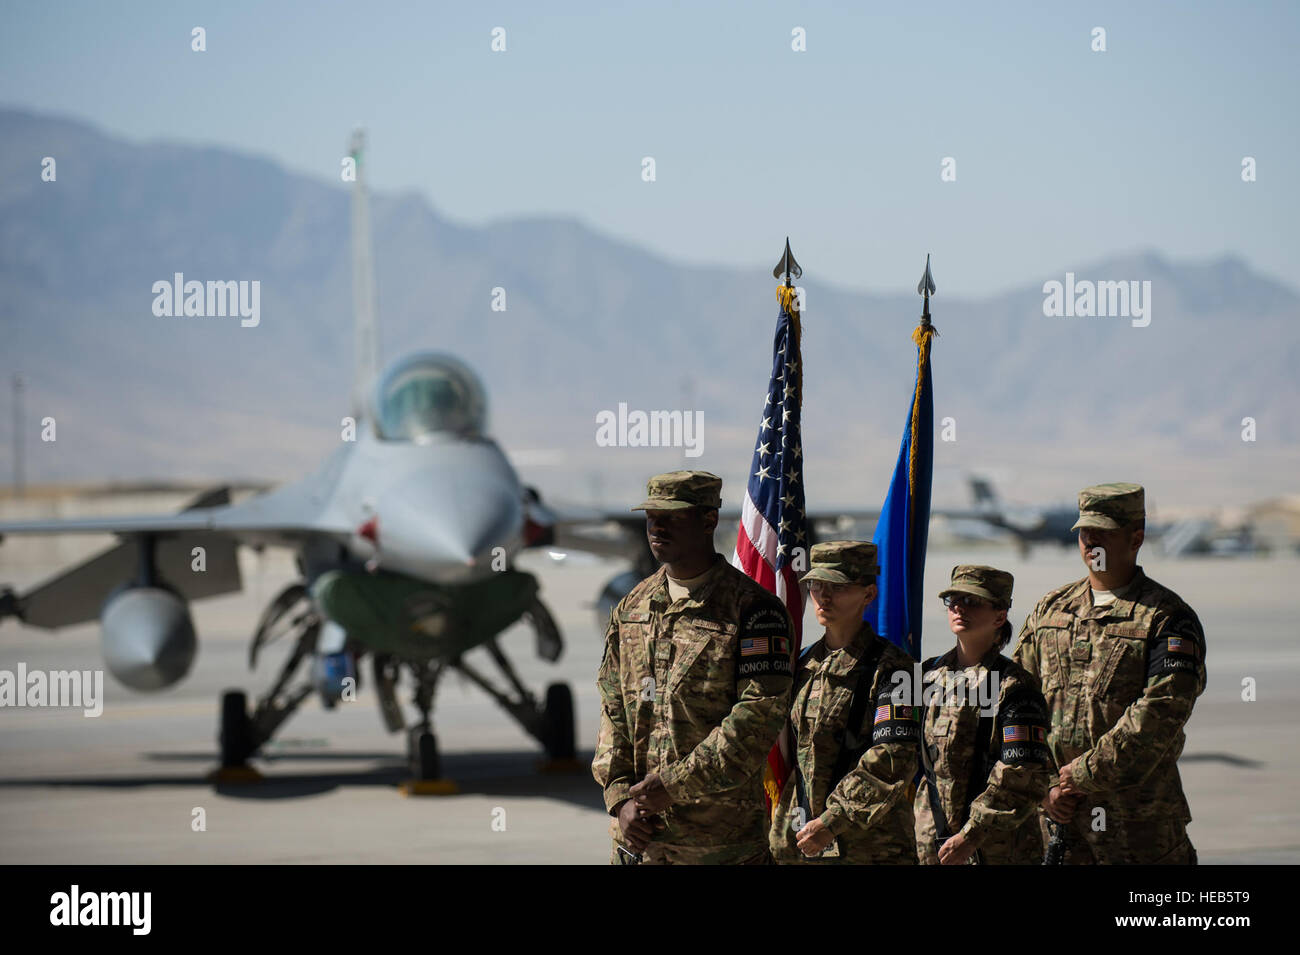 U.S. Airmen with the Bagram Air Field Honor Guard stand ready to present the colors during the 455th Air Expeditionary Wing change of command ceremony at Bagram Air Field, Afghanistan, July 1, 2015. During the ceremony Kelly relinquished command of the 455th AEW to Brig. Gen. Dave Julazadeh.   Tech. Sgt. Joseph Swafford Stock Photo